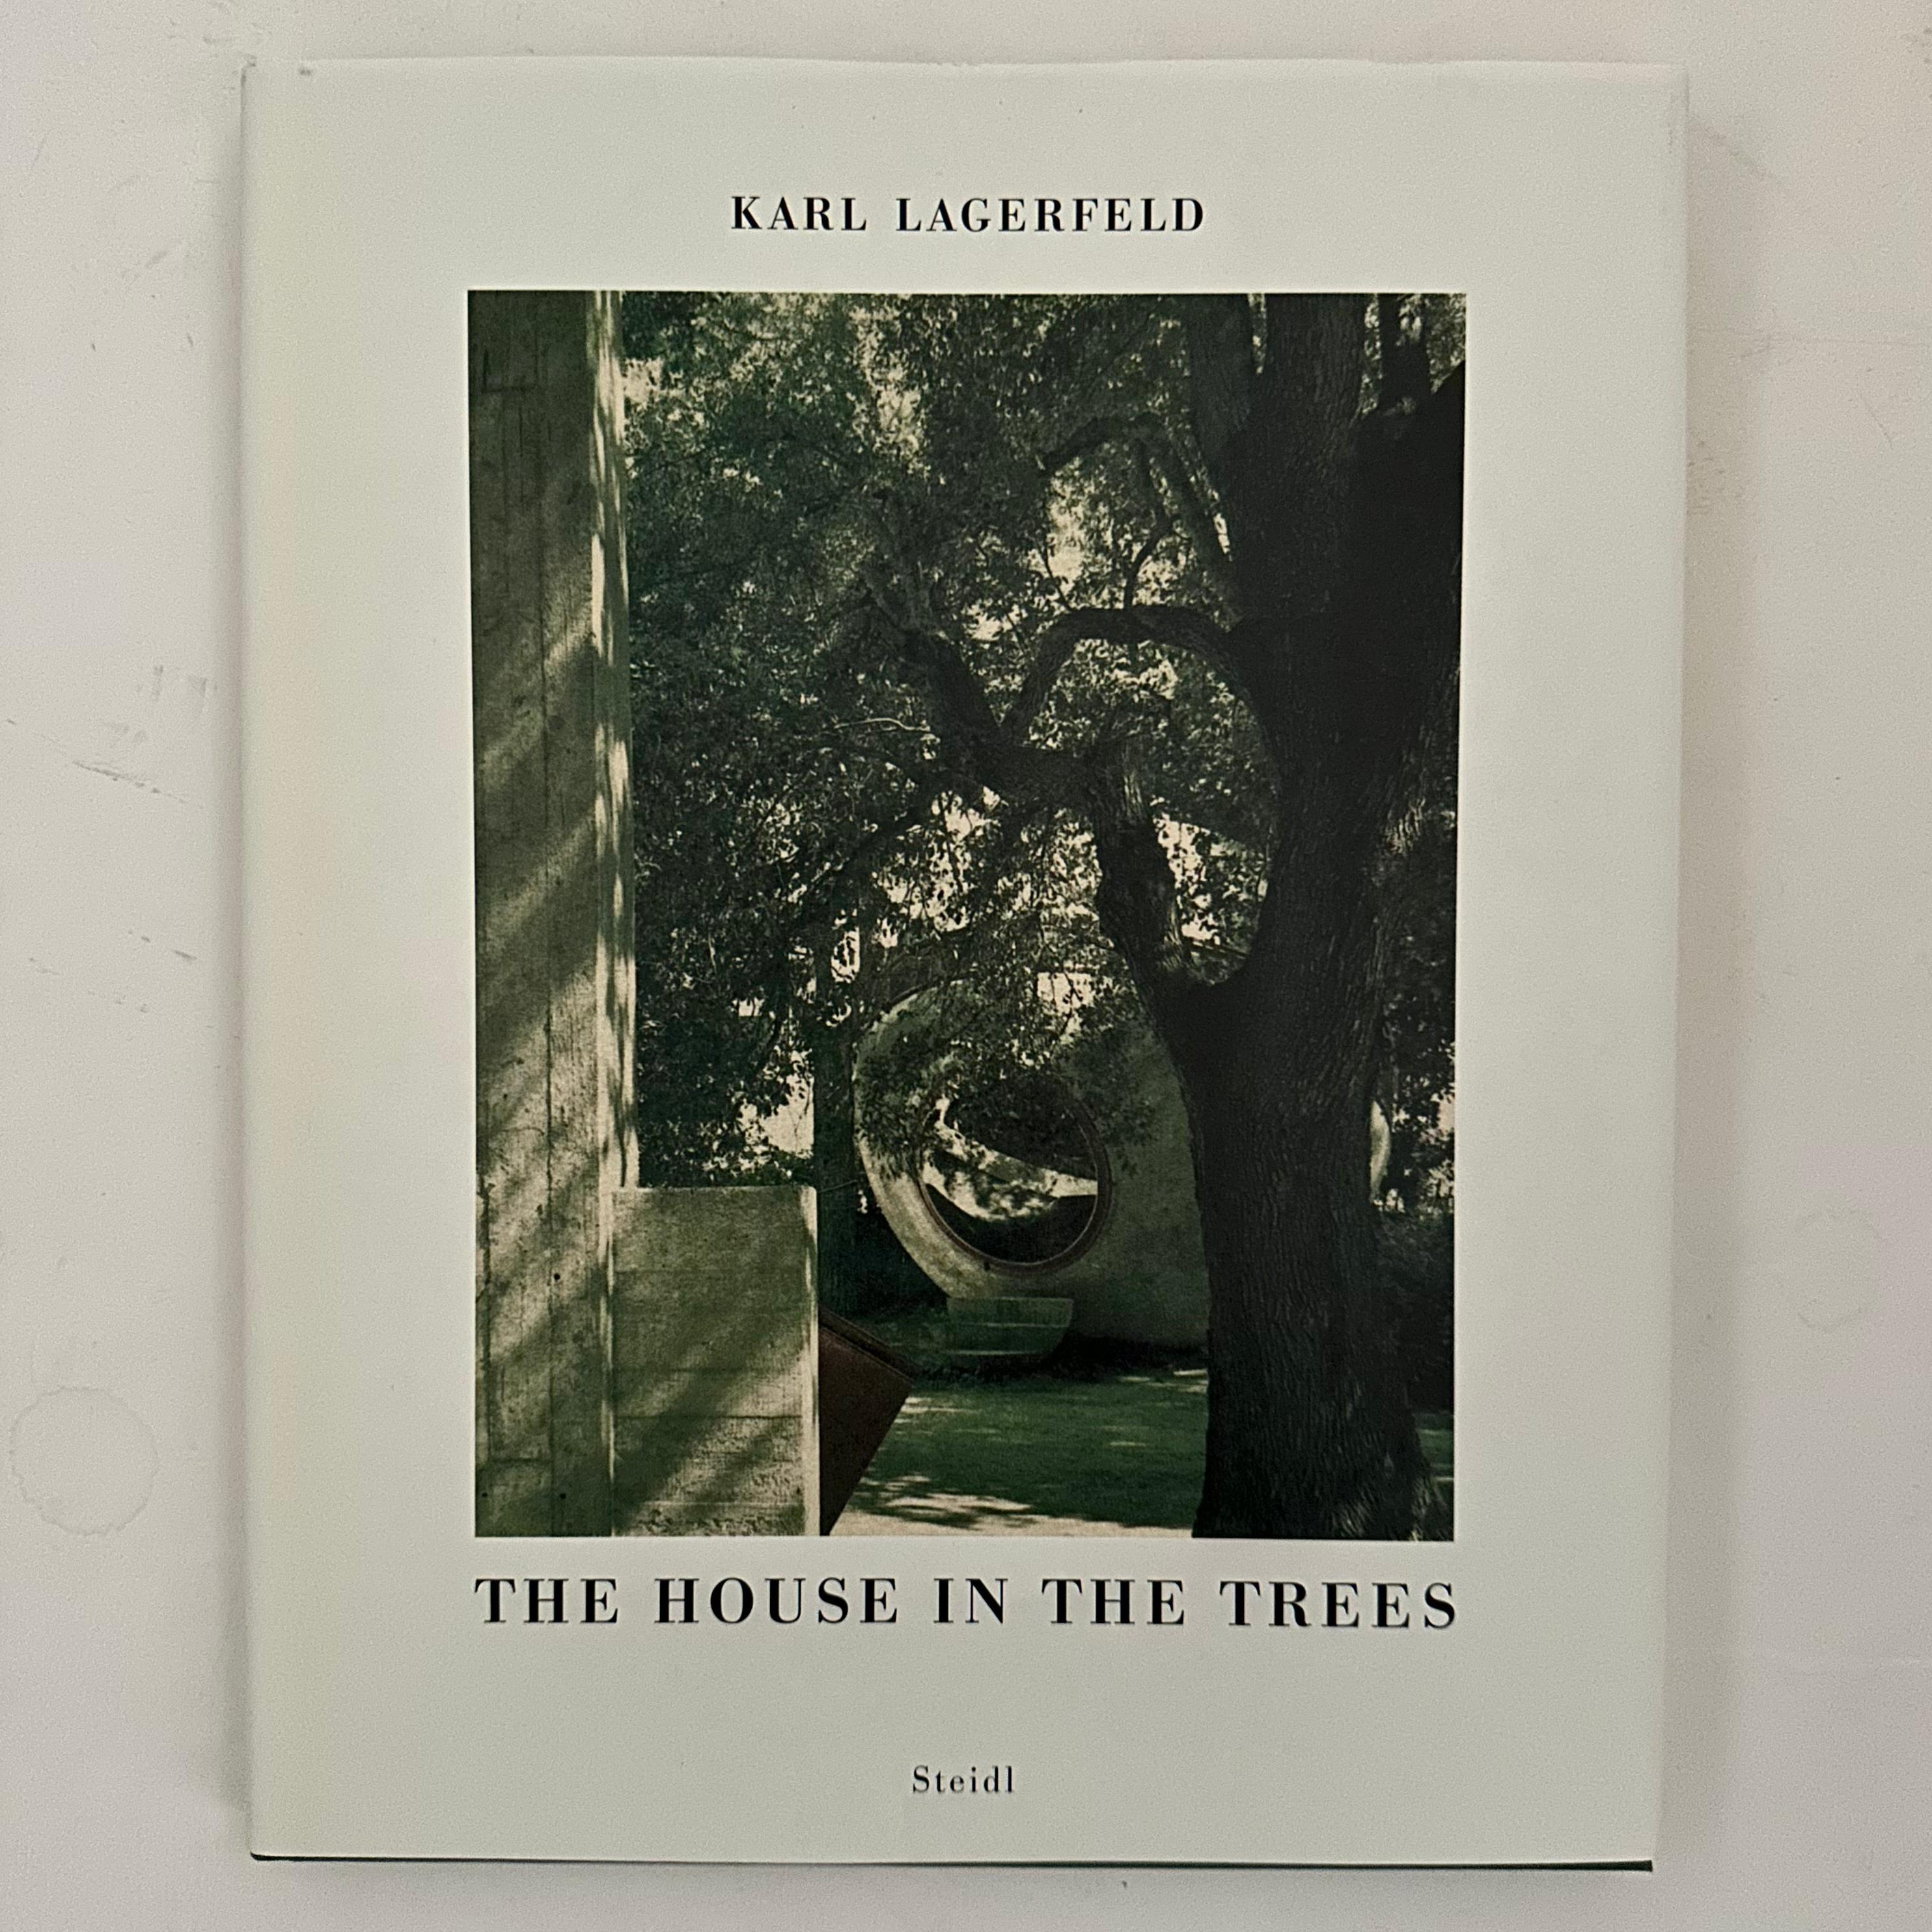 Late 20th Century Modern Italian Architecture - Karl Lagerfeld - 1998 For Sale